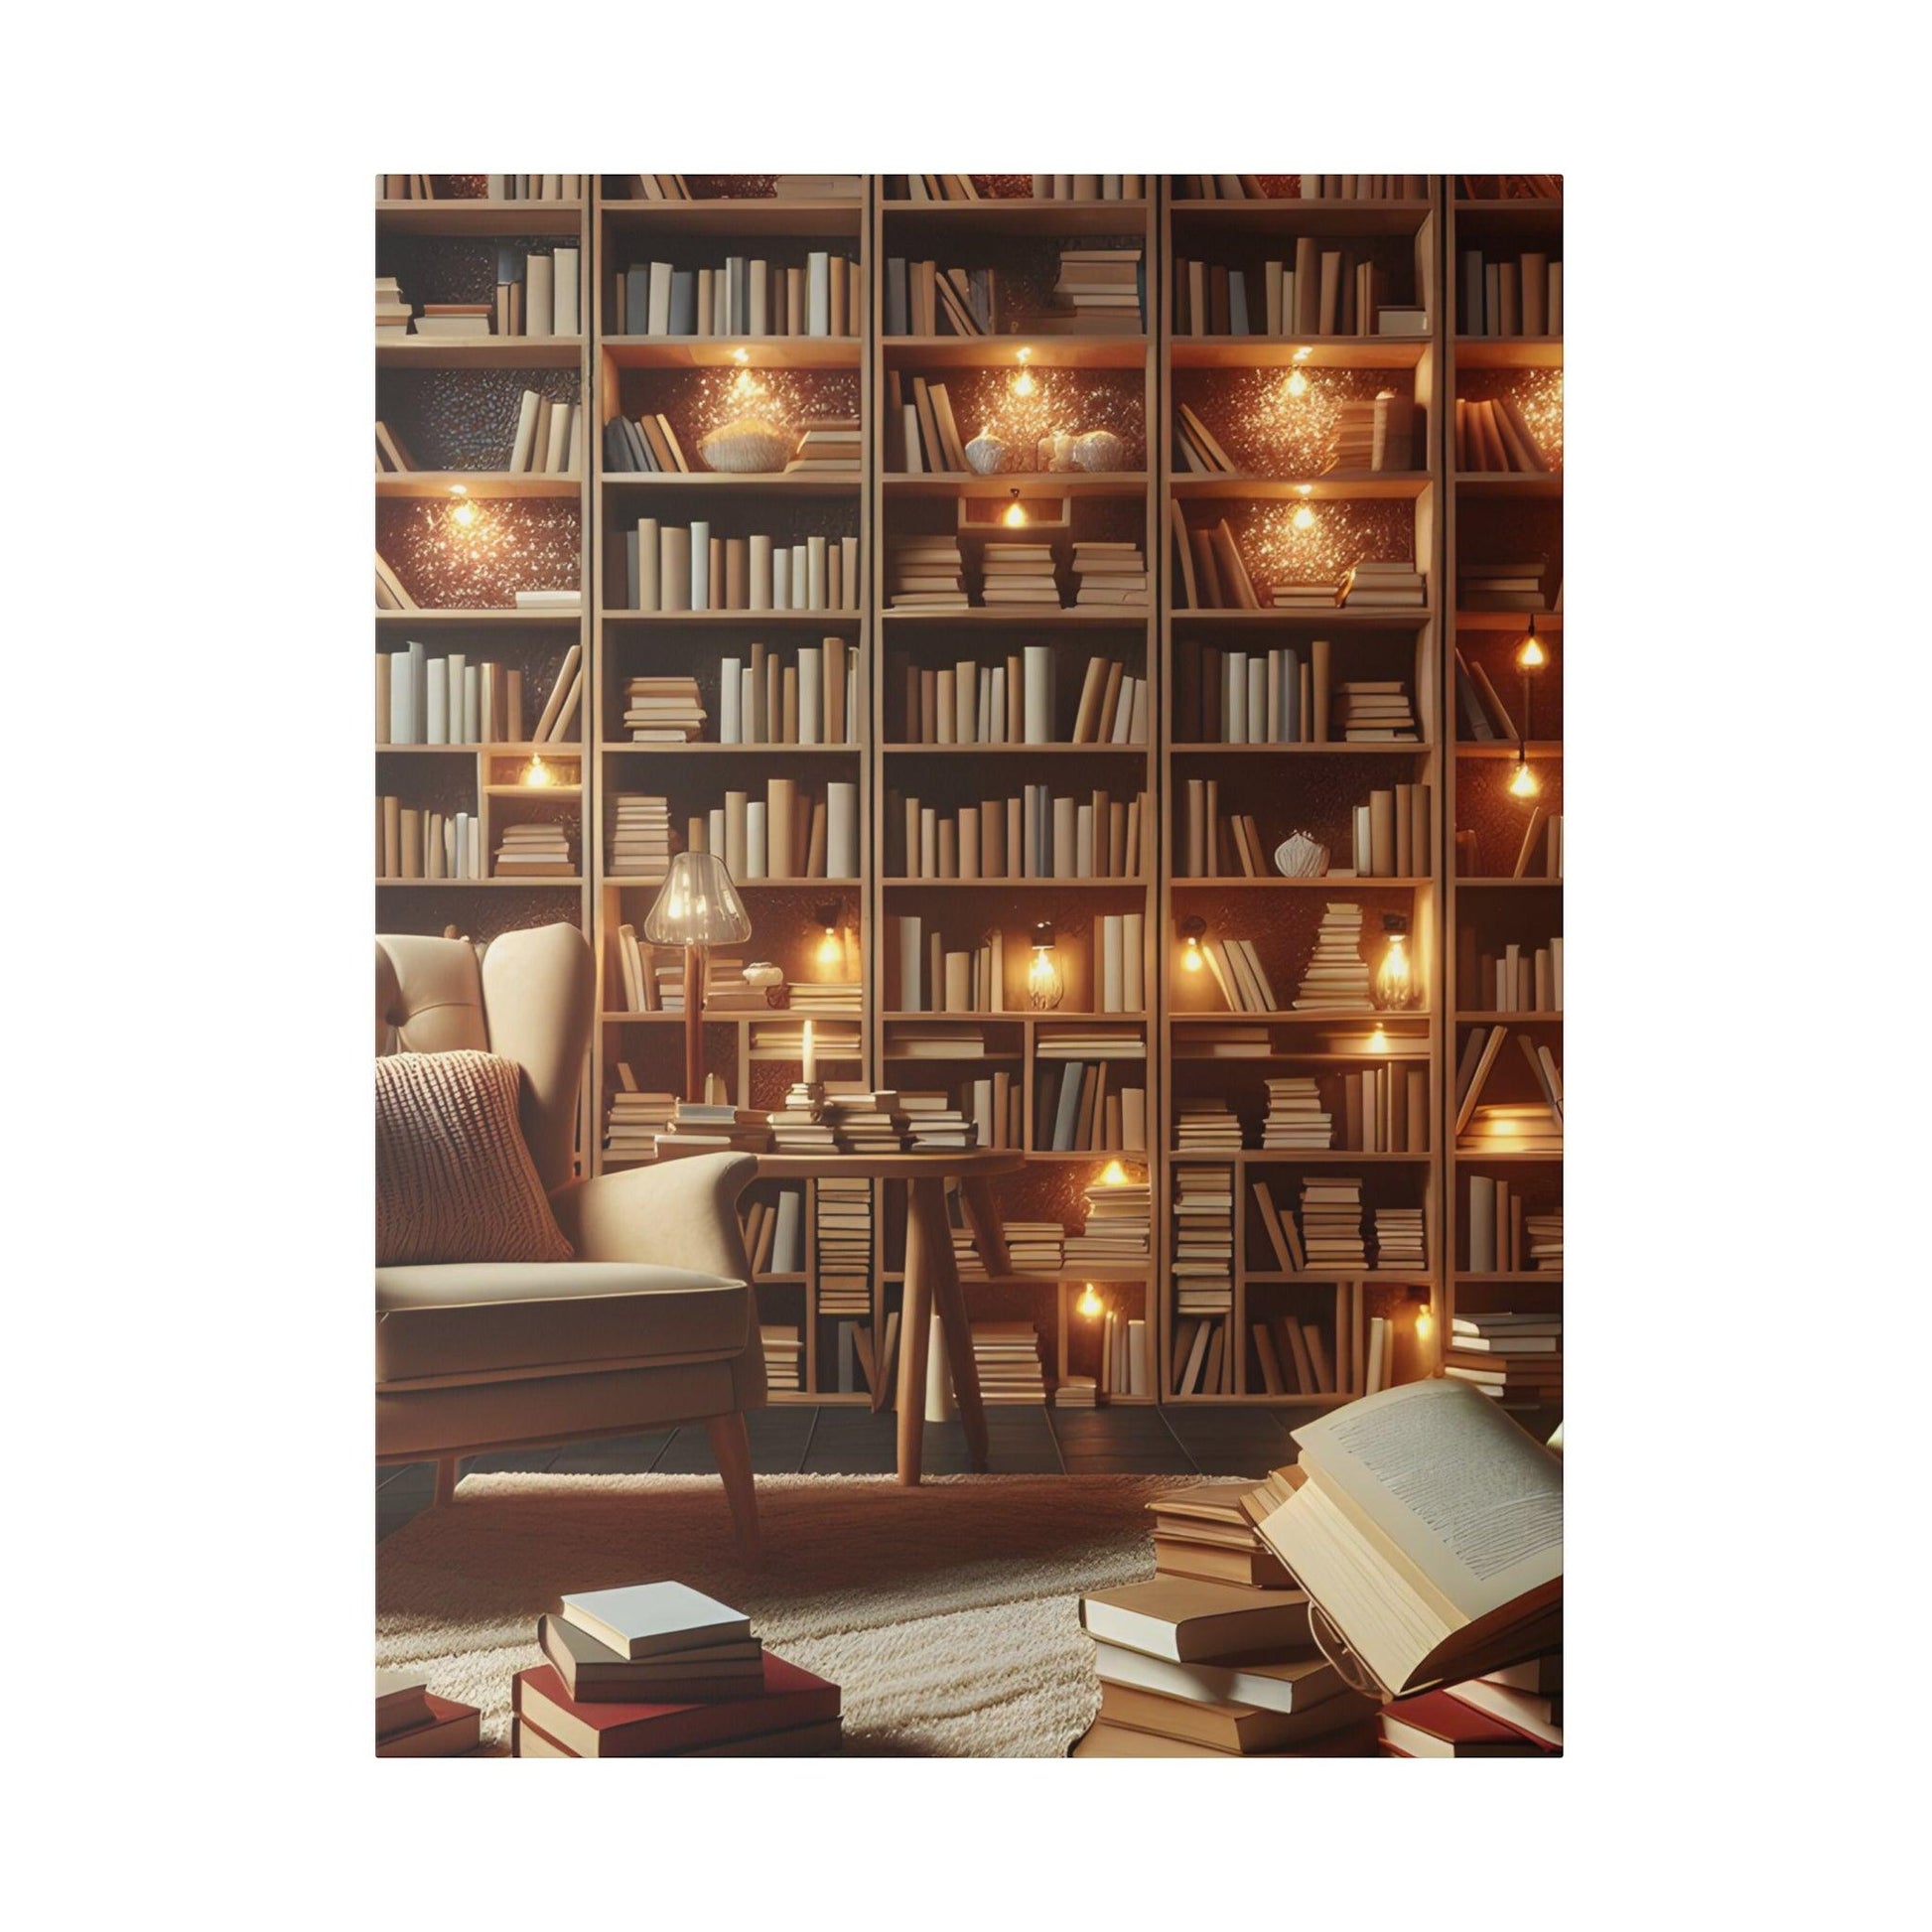 "Booklore Bliss Canvas Wall Art" - The Alice Gallery